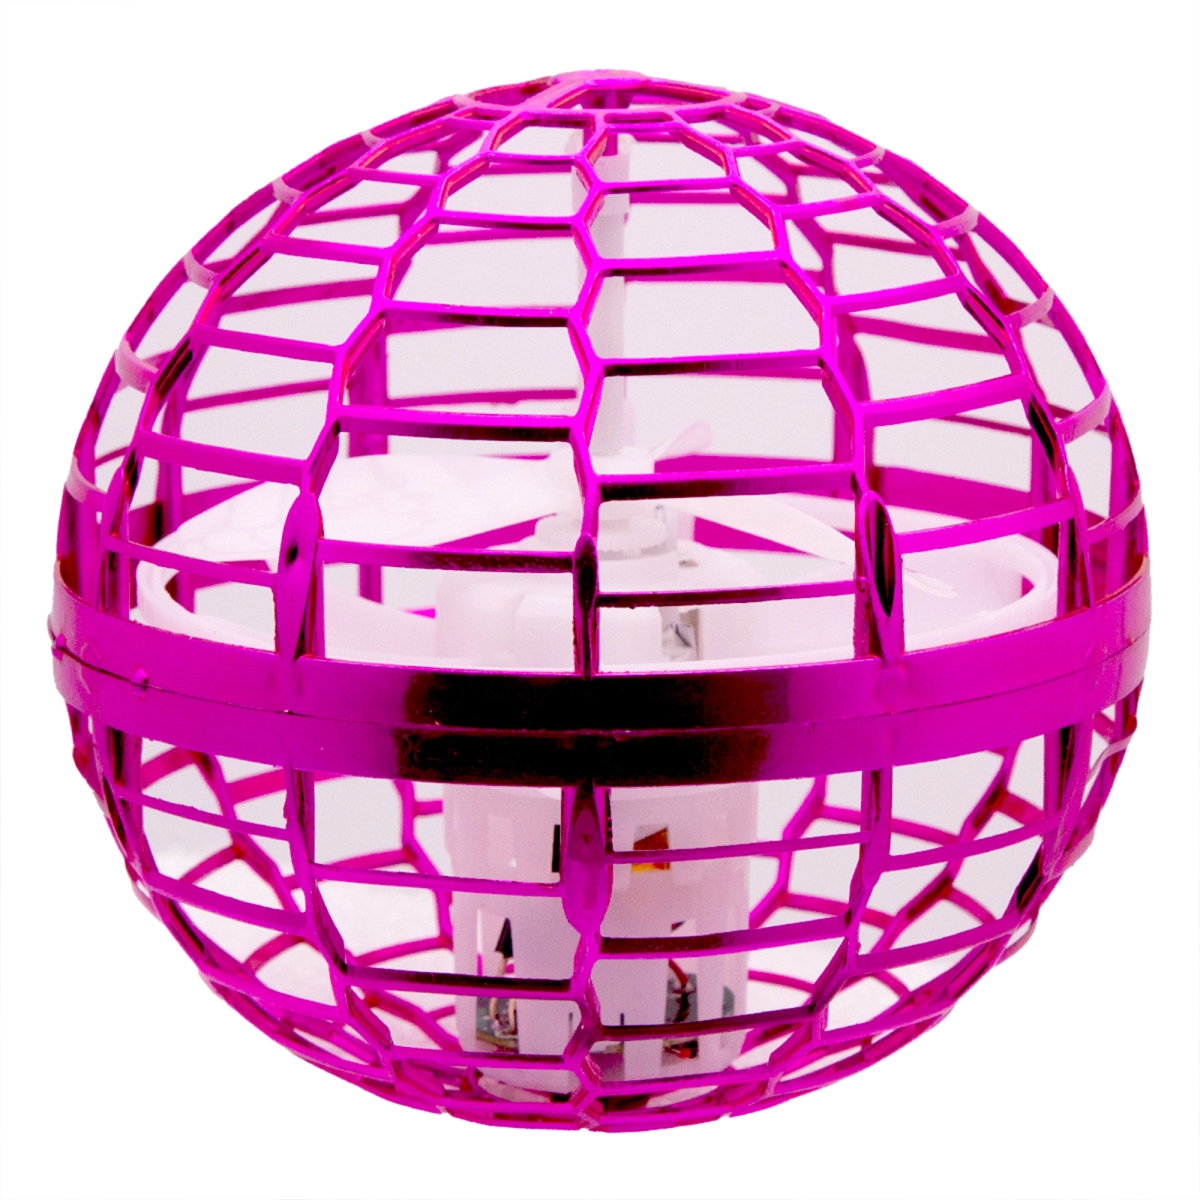 Picture of Zummy FS1161RE Hand Operated Flying LED Orb Ball Toy with Boomerang Effect for Indoors and Outdoors